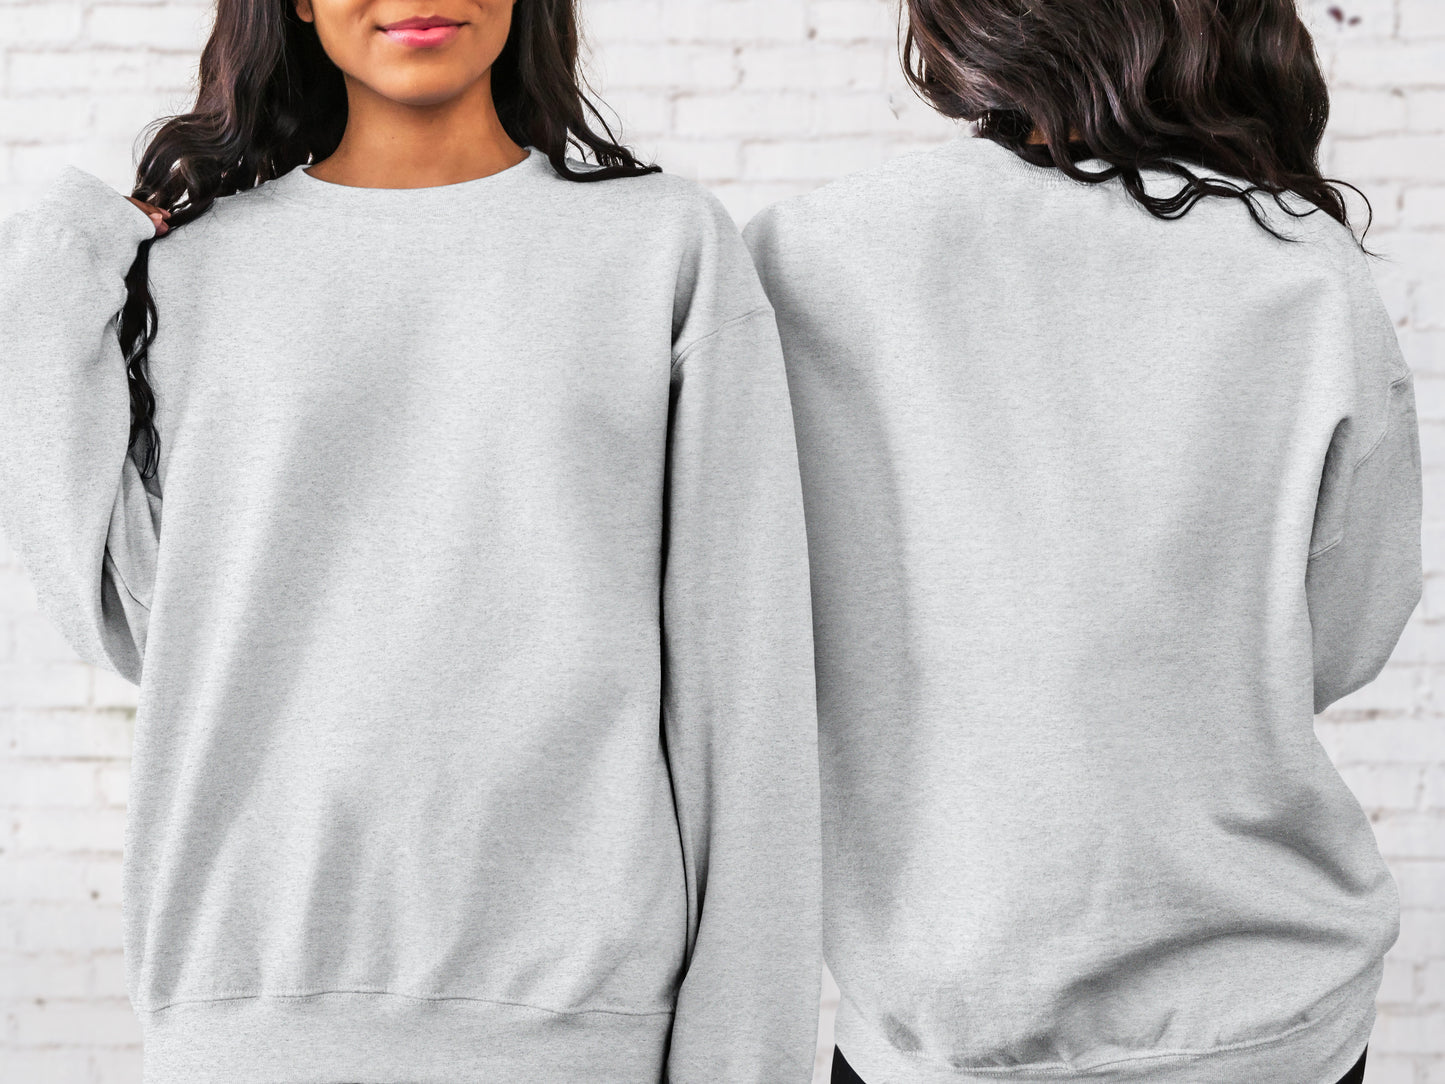 Mom Bruh Unisex Crewneck Sweatshirt Our sweatshirts are made of a heavy, yet soft and breathable material that maintains it's shape and size. Pair it with your favourite jeans or joggers for a casual look. Grey